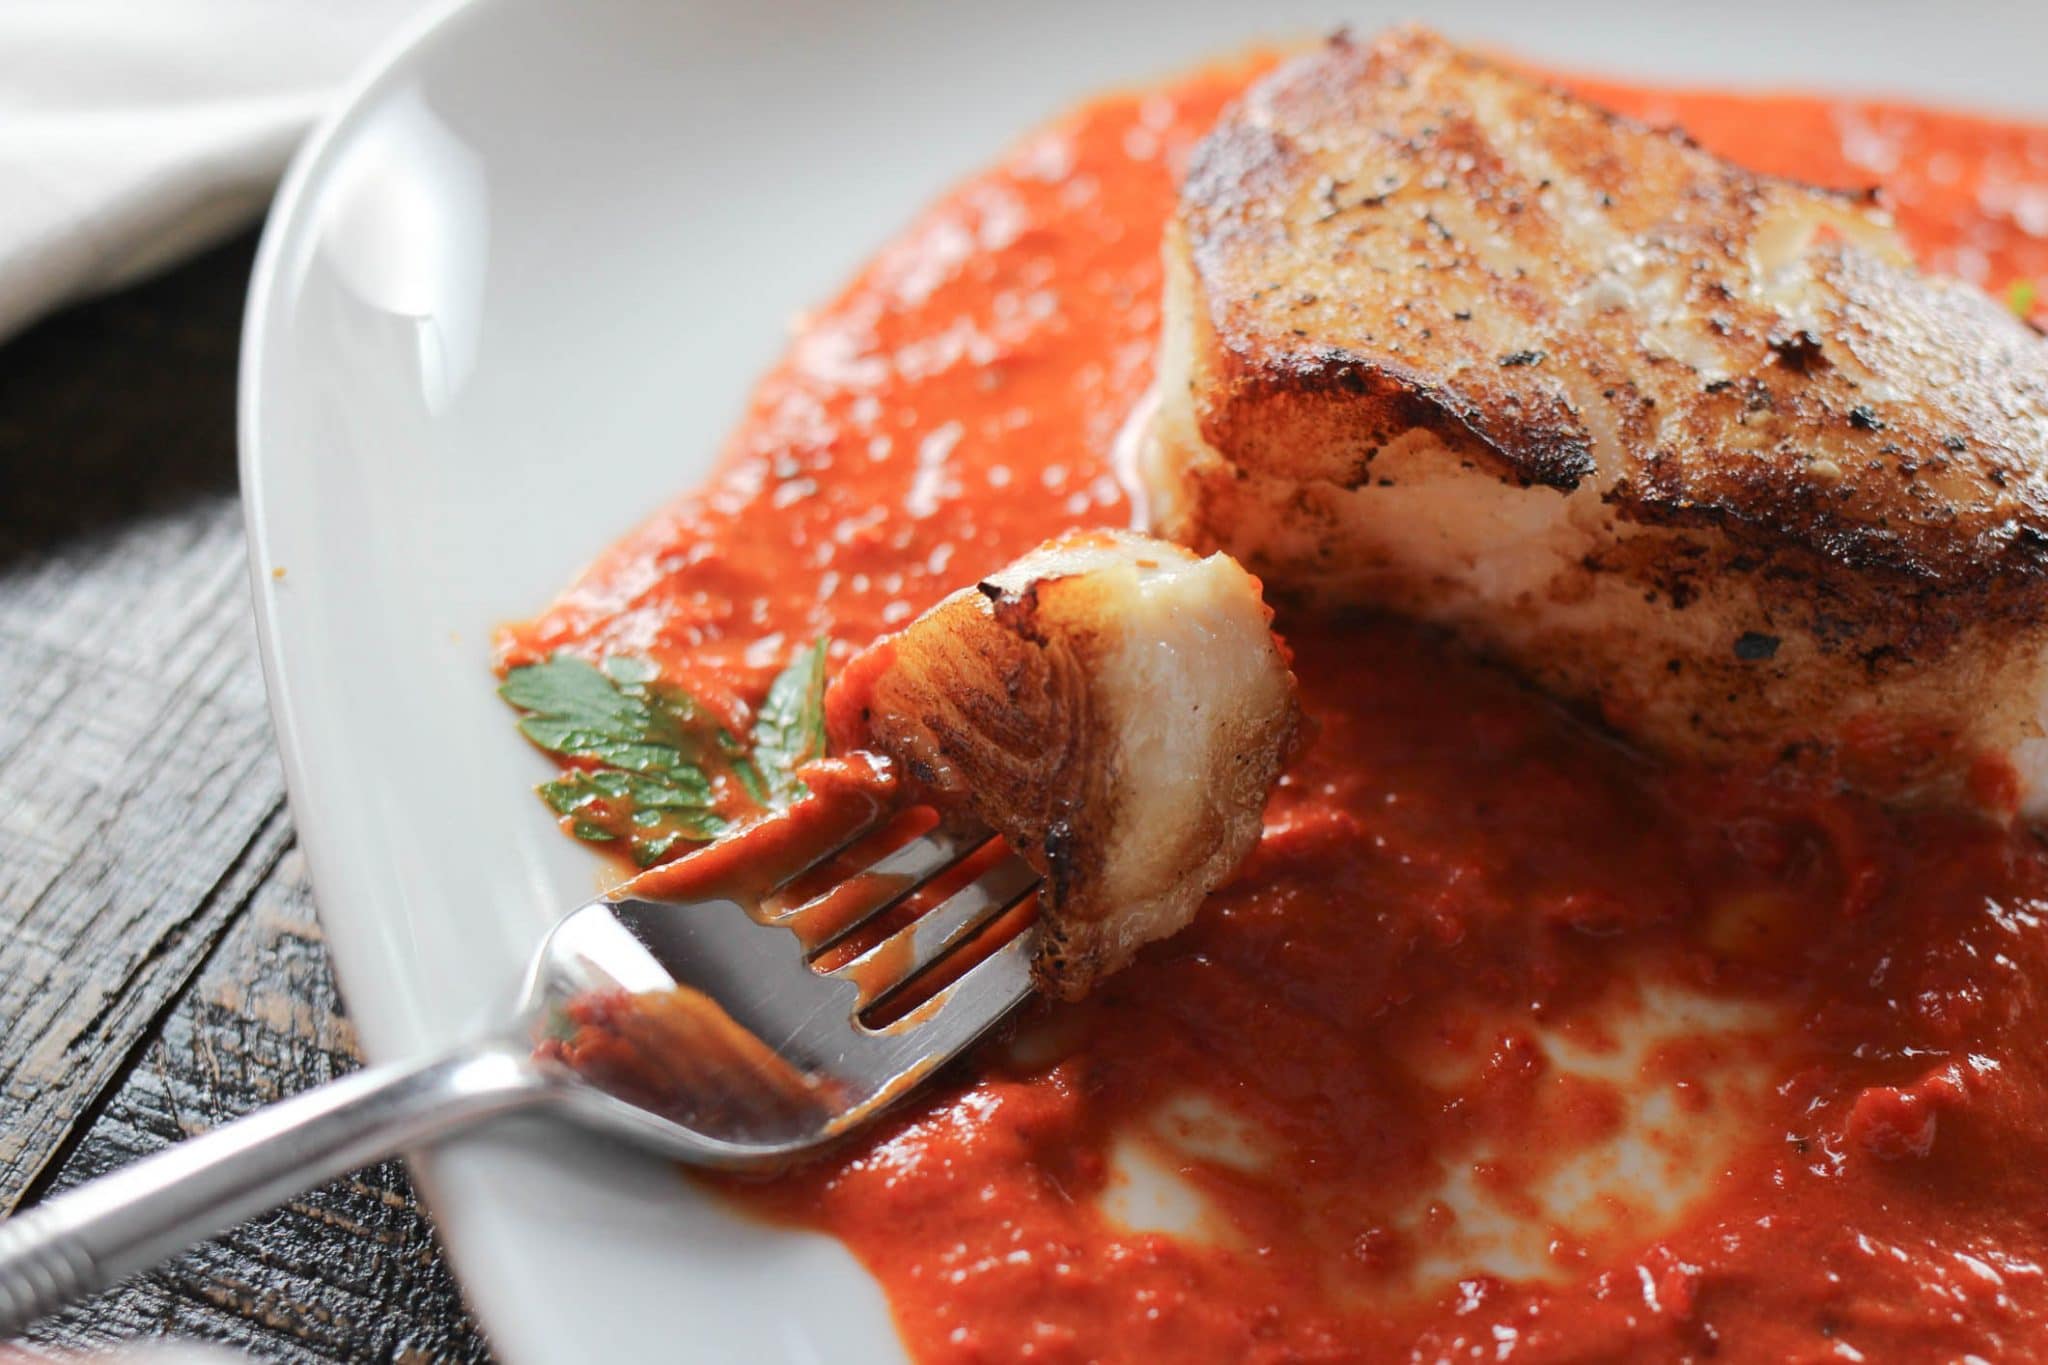 A perfectly seared Chilean sea bass with a spicy red pepper sauce.